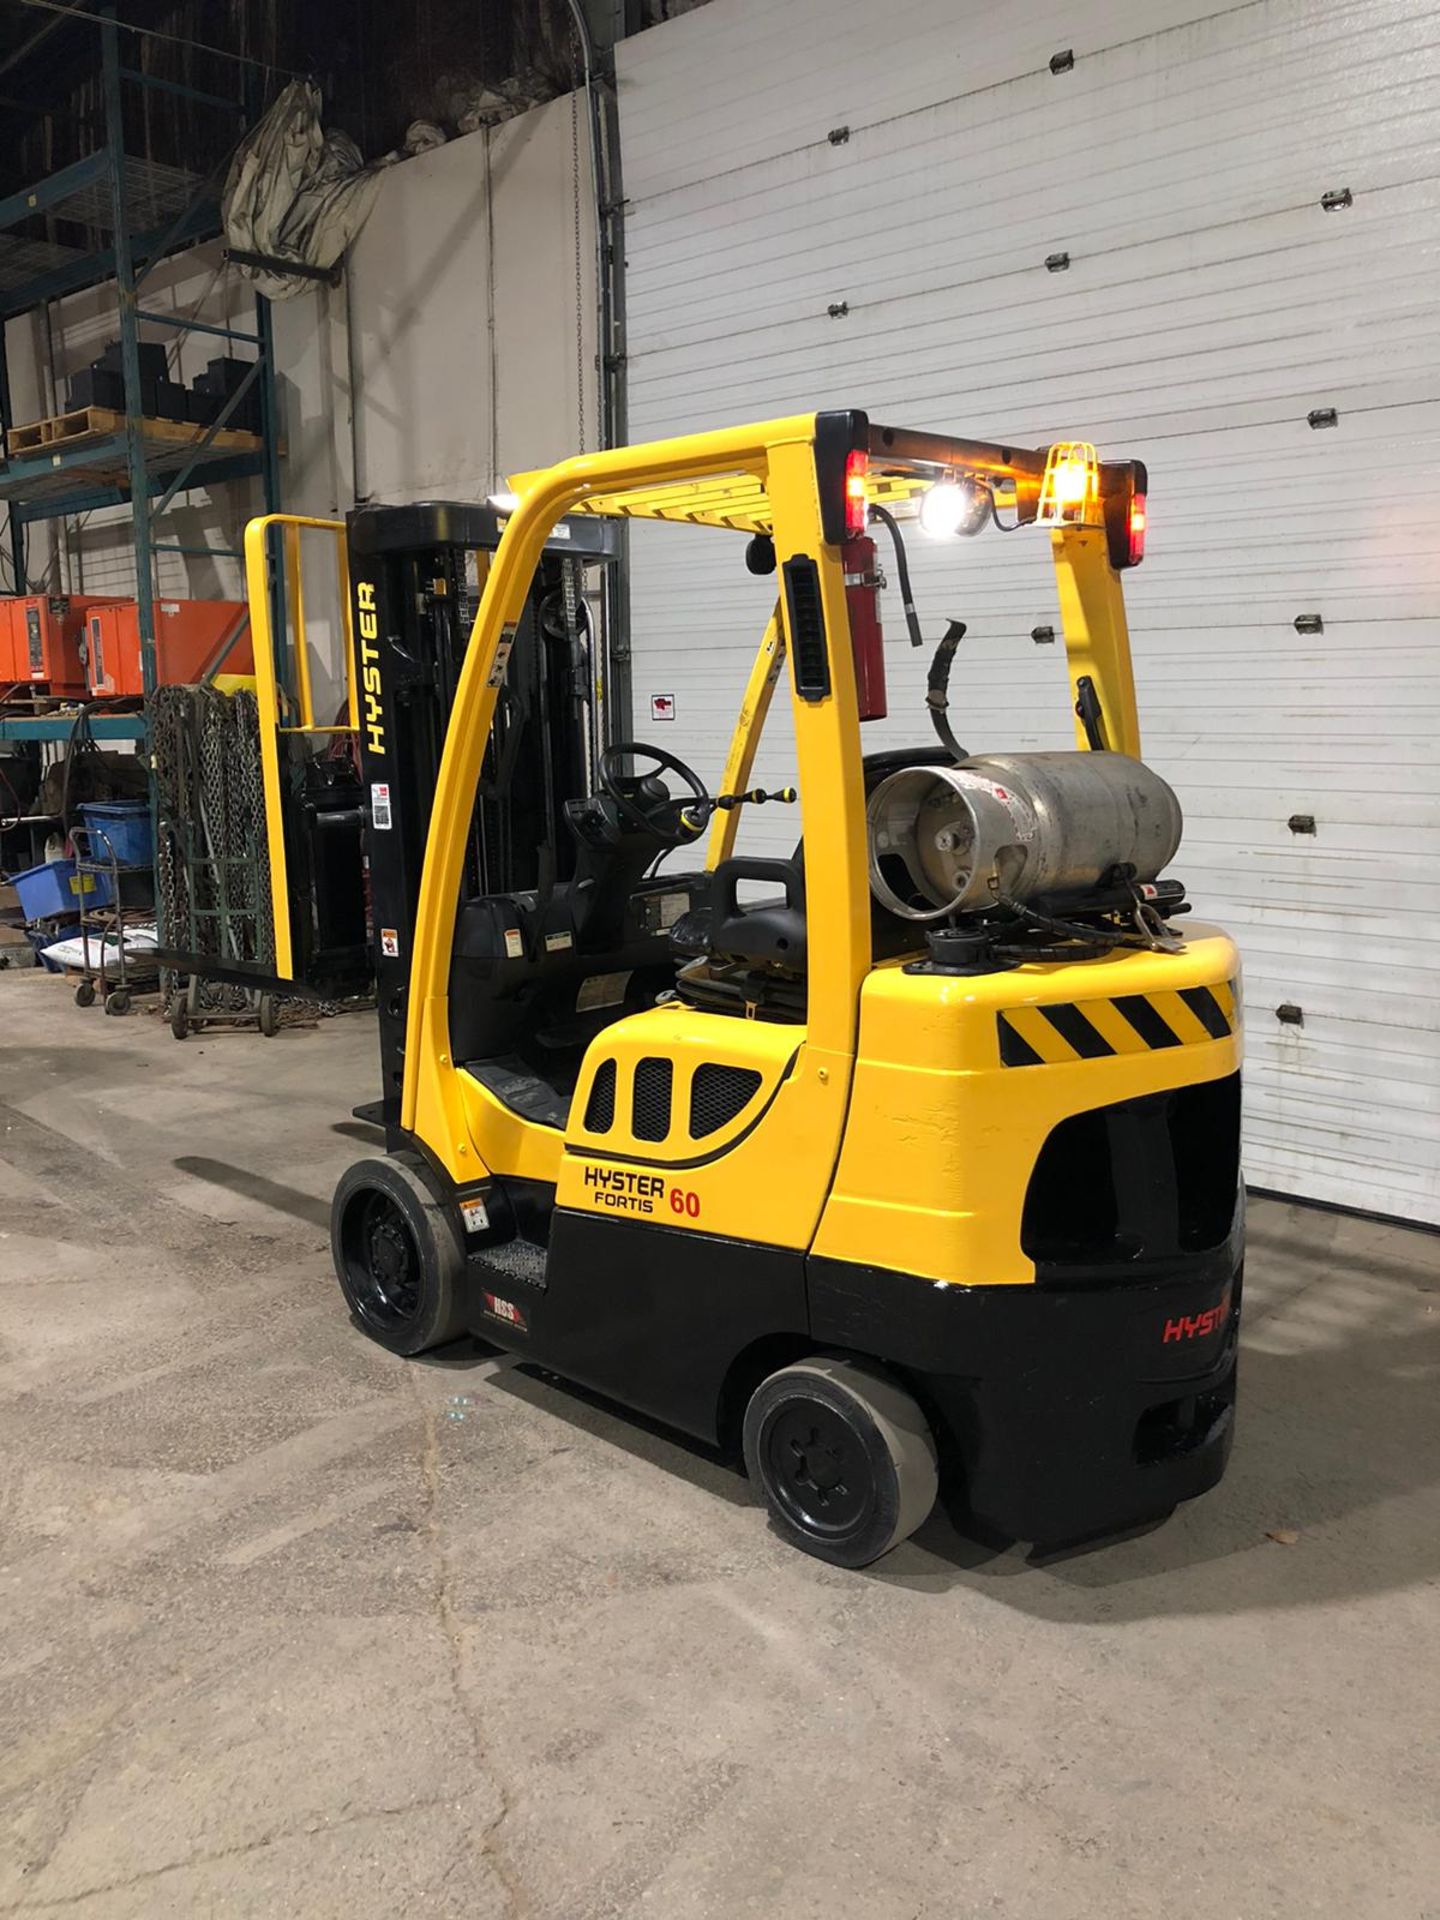 NICE 2018 Hyster model 60 - 6,000lbs Capacity LPG (propane) Forklift with Sideshift - 3-stage mast - - Image 2 of 6